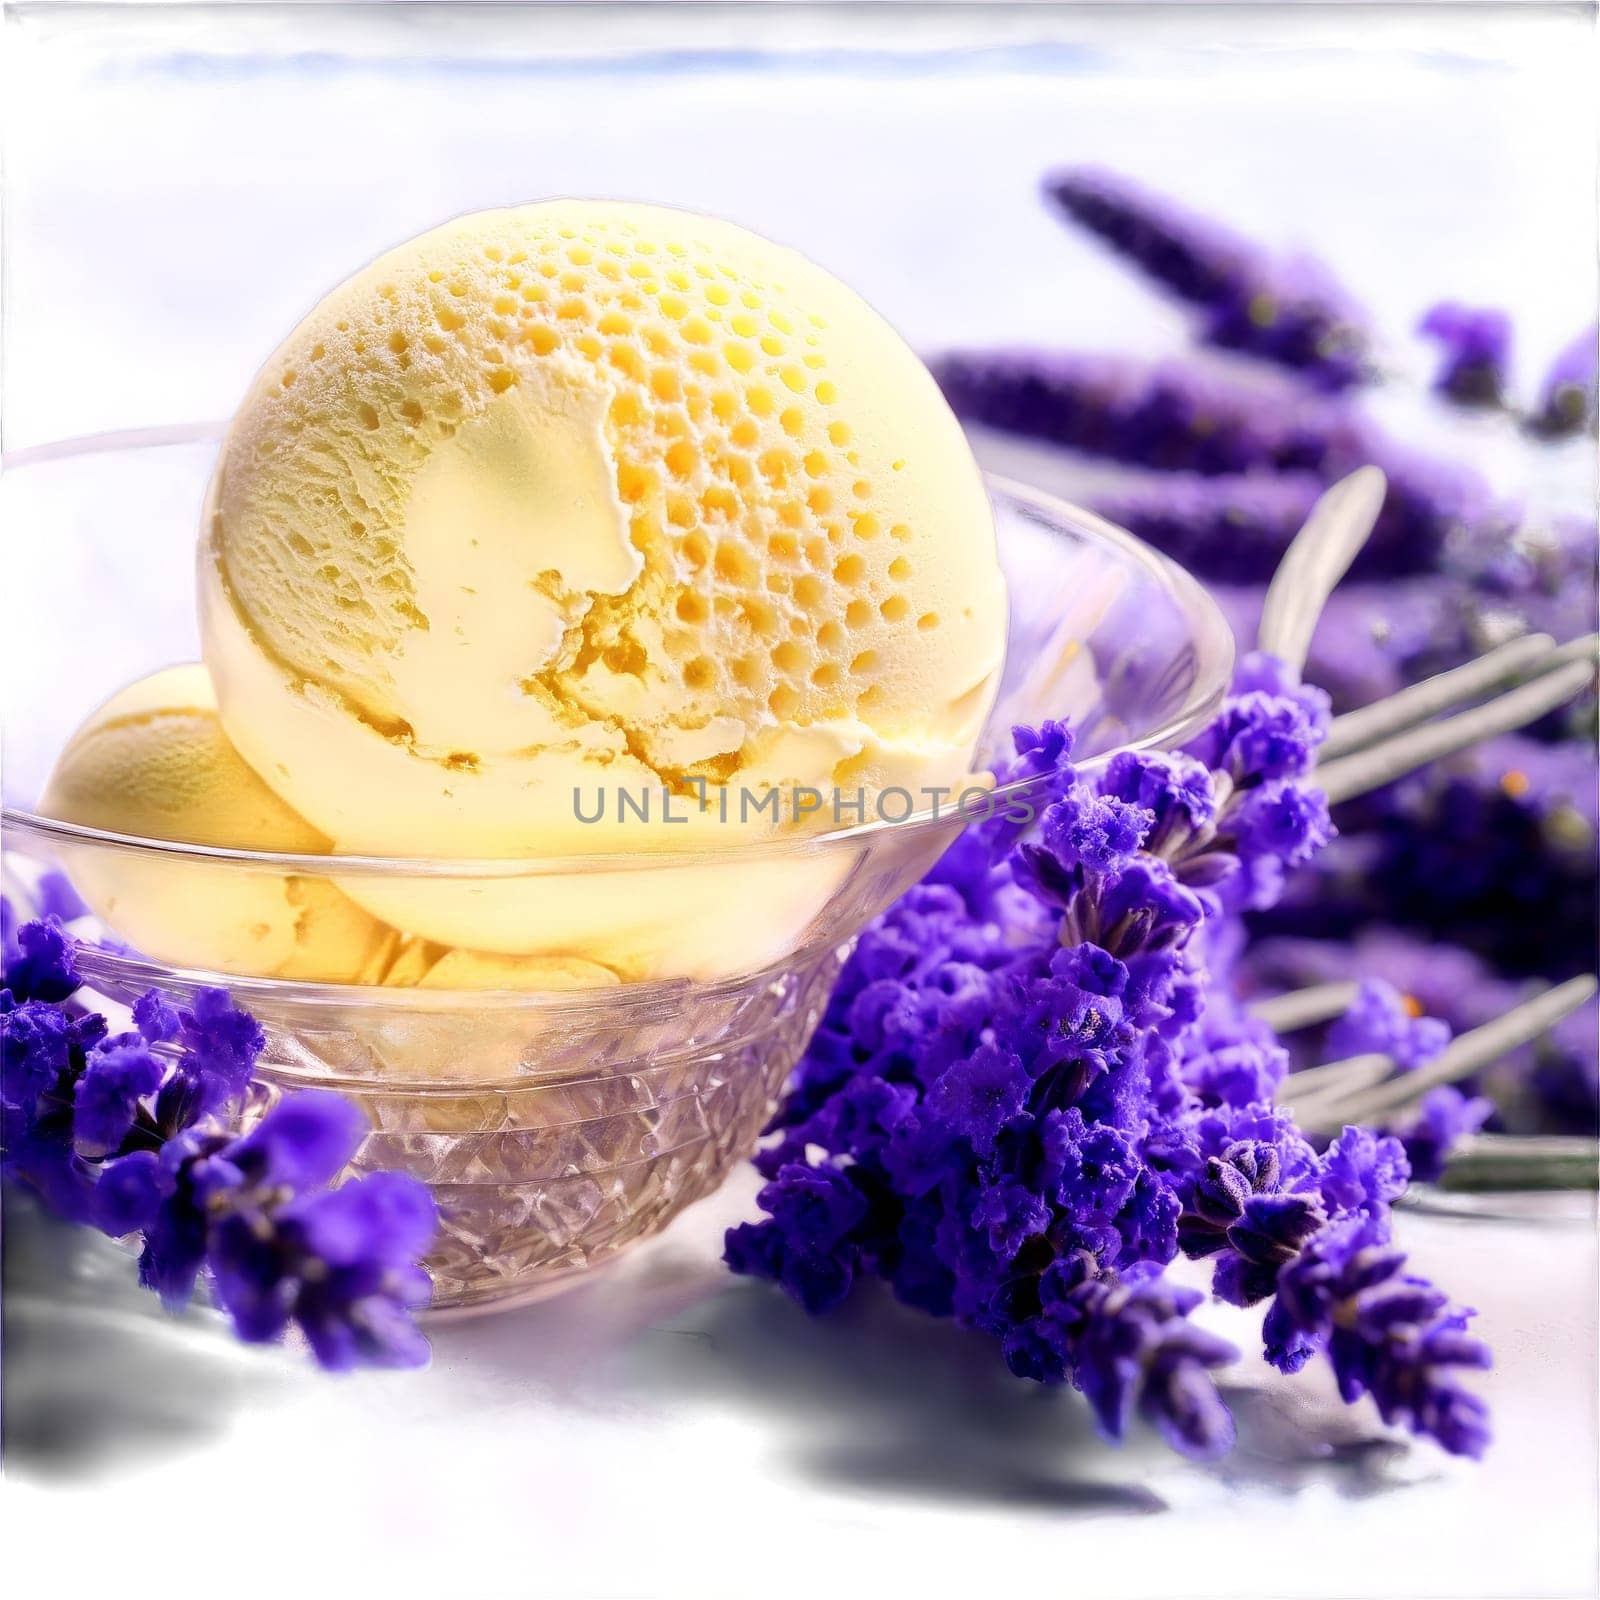 Lavender honey ice cream pale purple served in a clear glass dish garnished with a. close-up food, isolated on transparent background